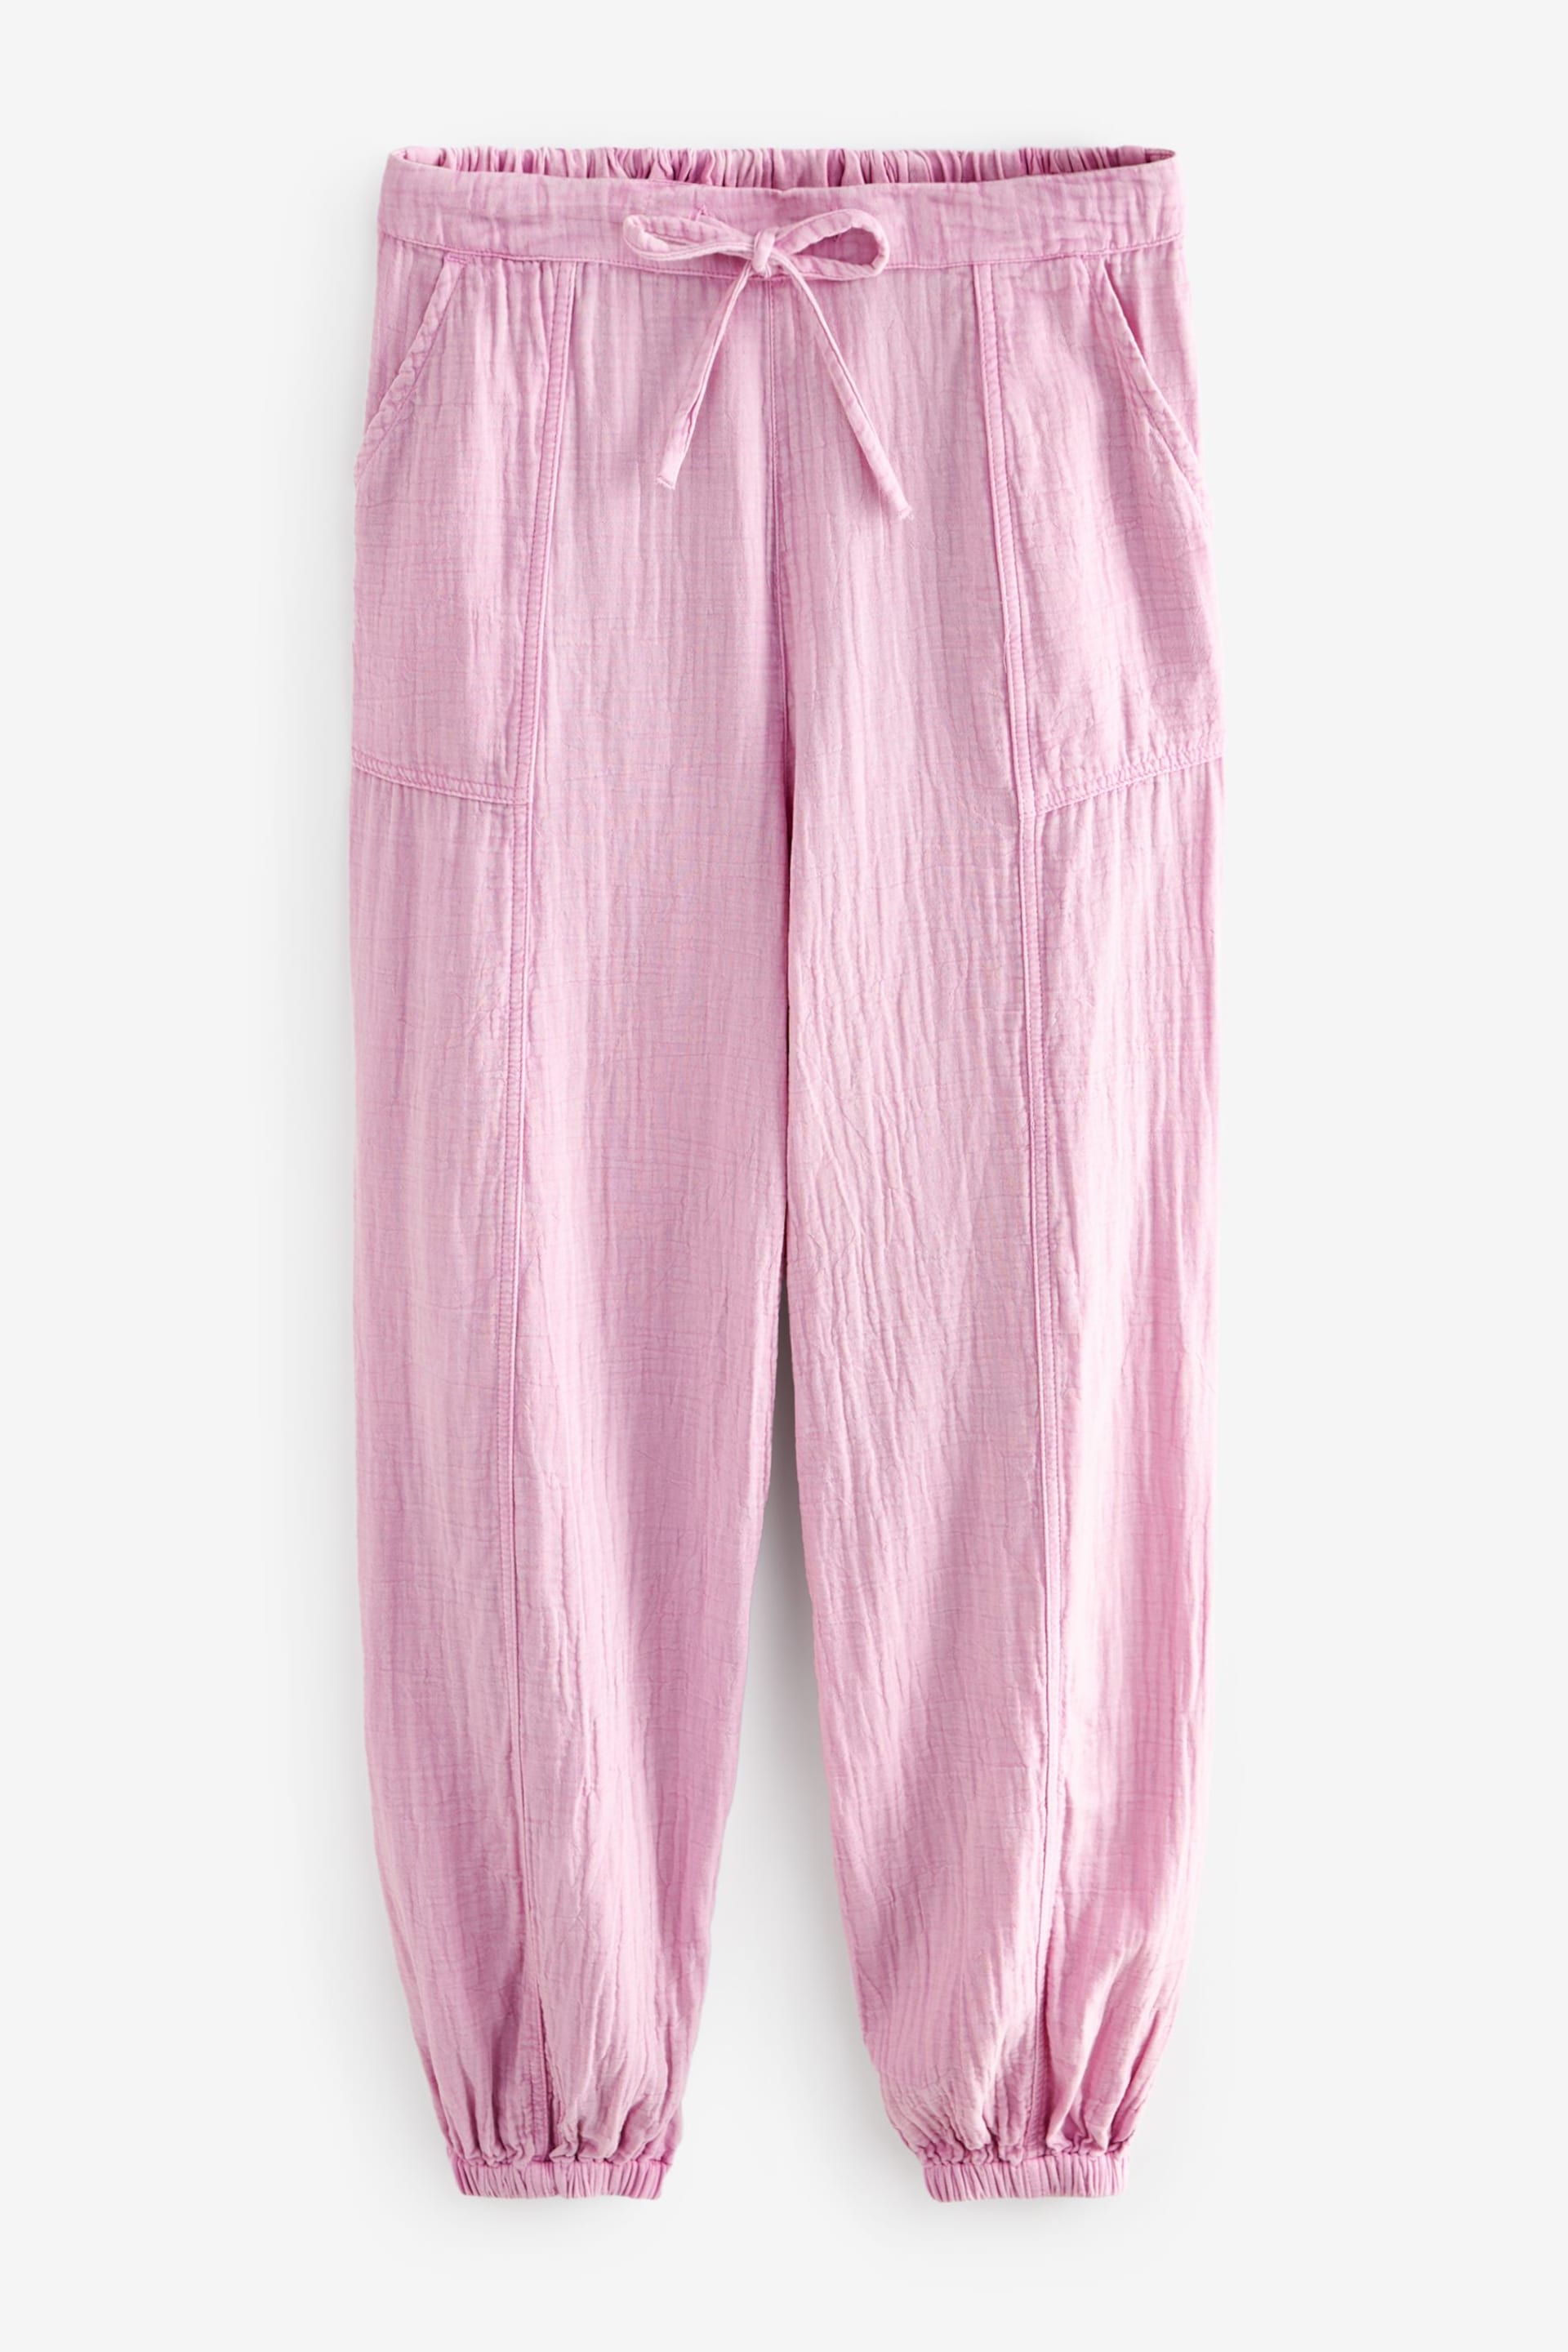 Lilac Purple Textured Cotton Pull On Trousers - Image 6 of 7